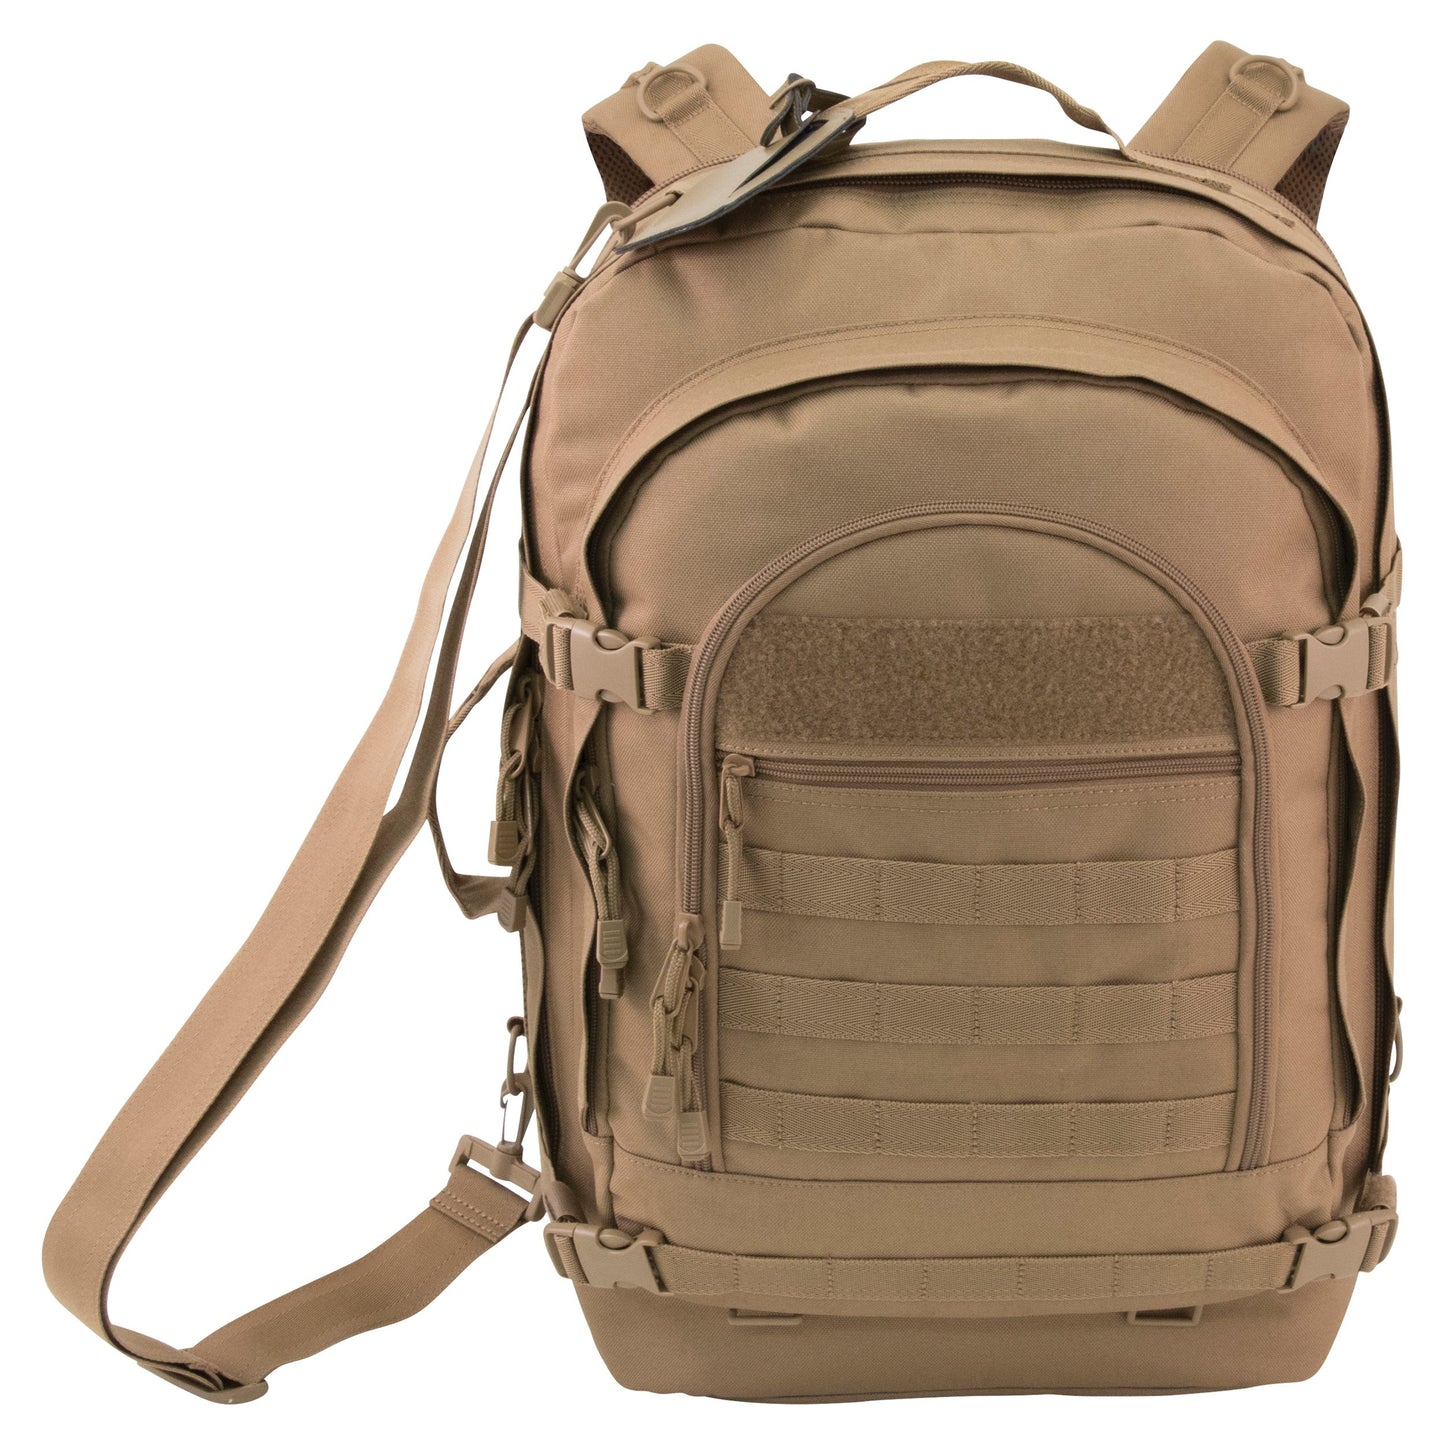 Mercury Tactical Gear Blaze Bugout Bag with Hydration Pack